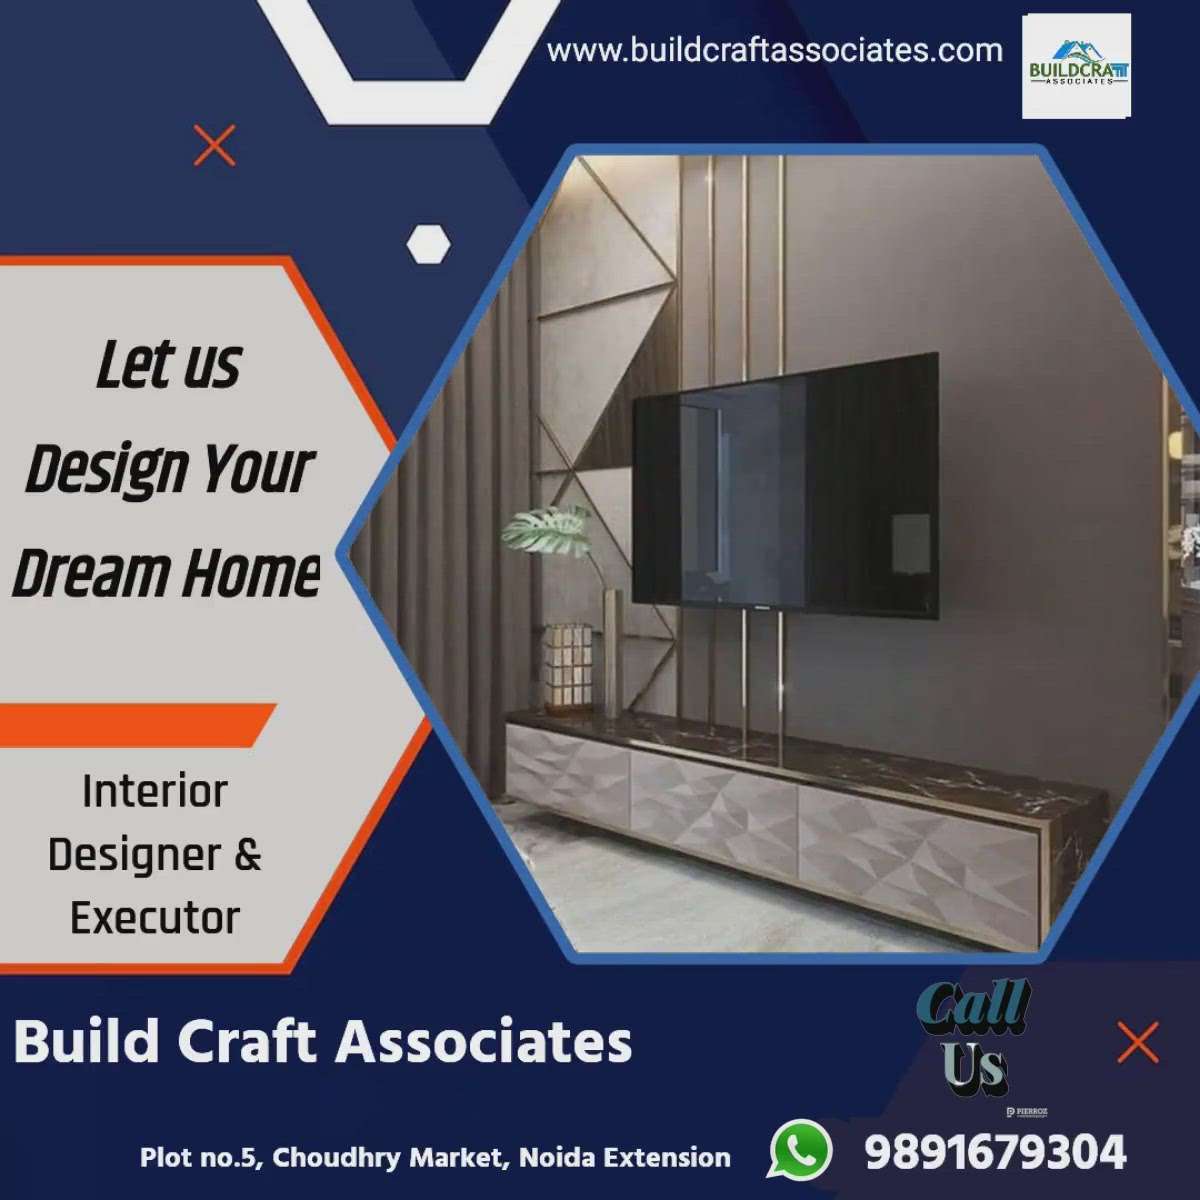 Quality interiors without the hefty price tag - explore our affordable design and execution options.
 #InteriorDesigner  #homerenovation  #homeinteriordesign  #ModularKitchen #WardrobeDesigns  #buildcraftassociates